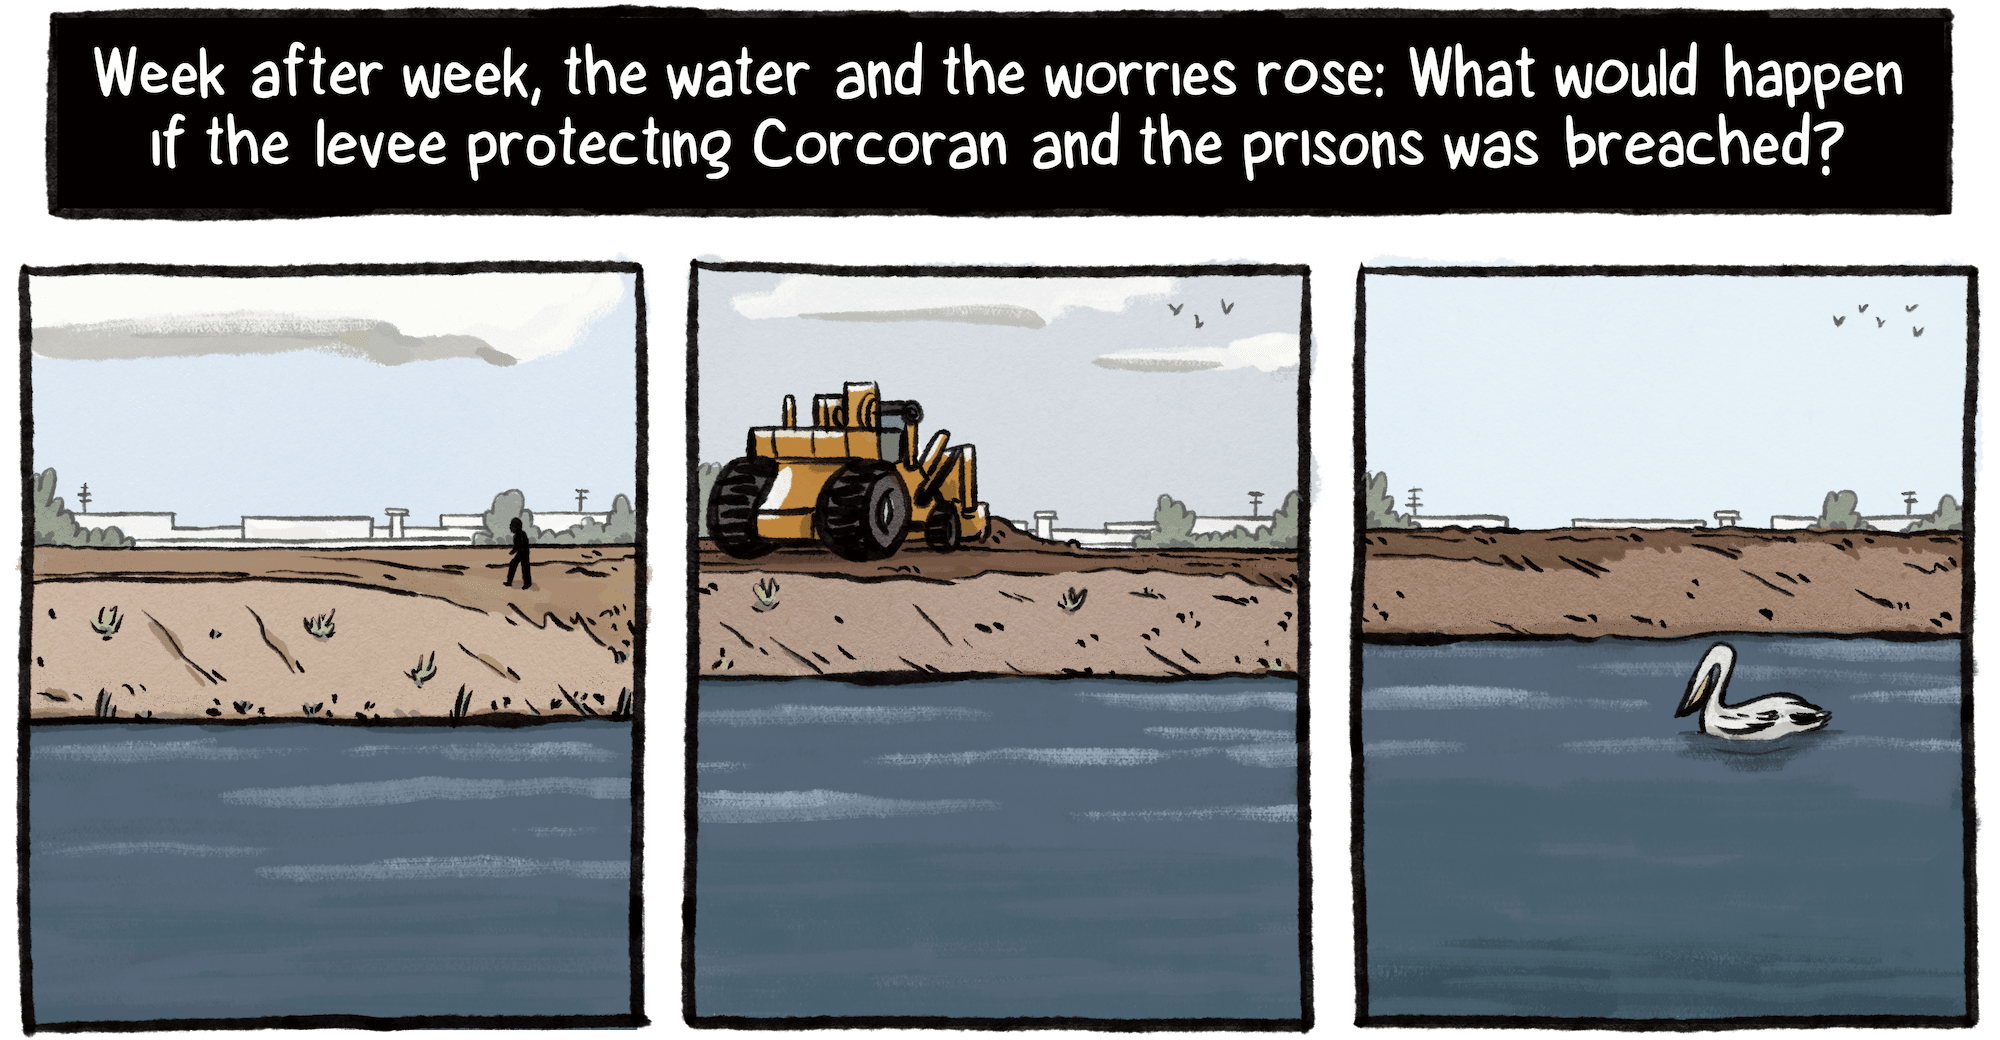 A front-end loader sits on a levee that protects the prisons and the city of Corcoran, and residents and officials worried about what would happen if it was breached.